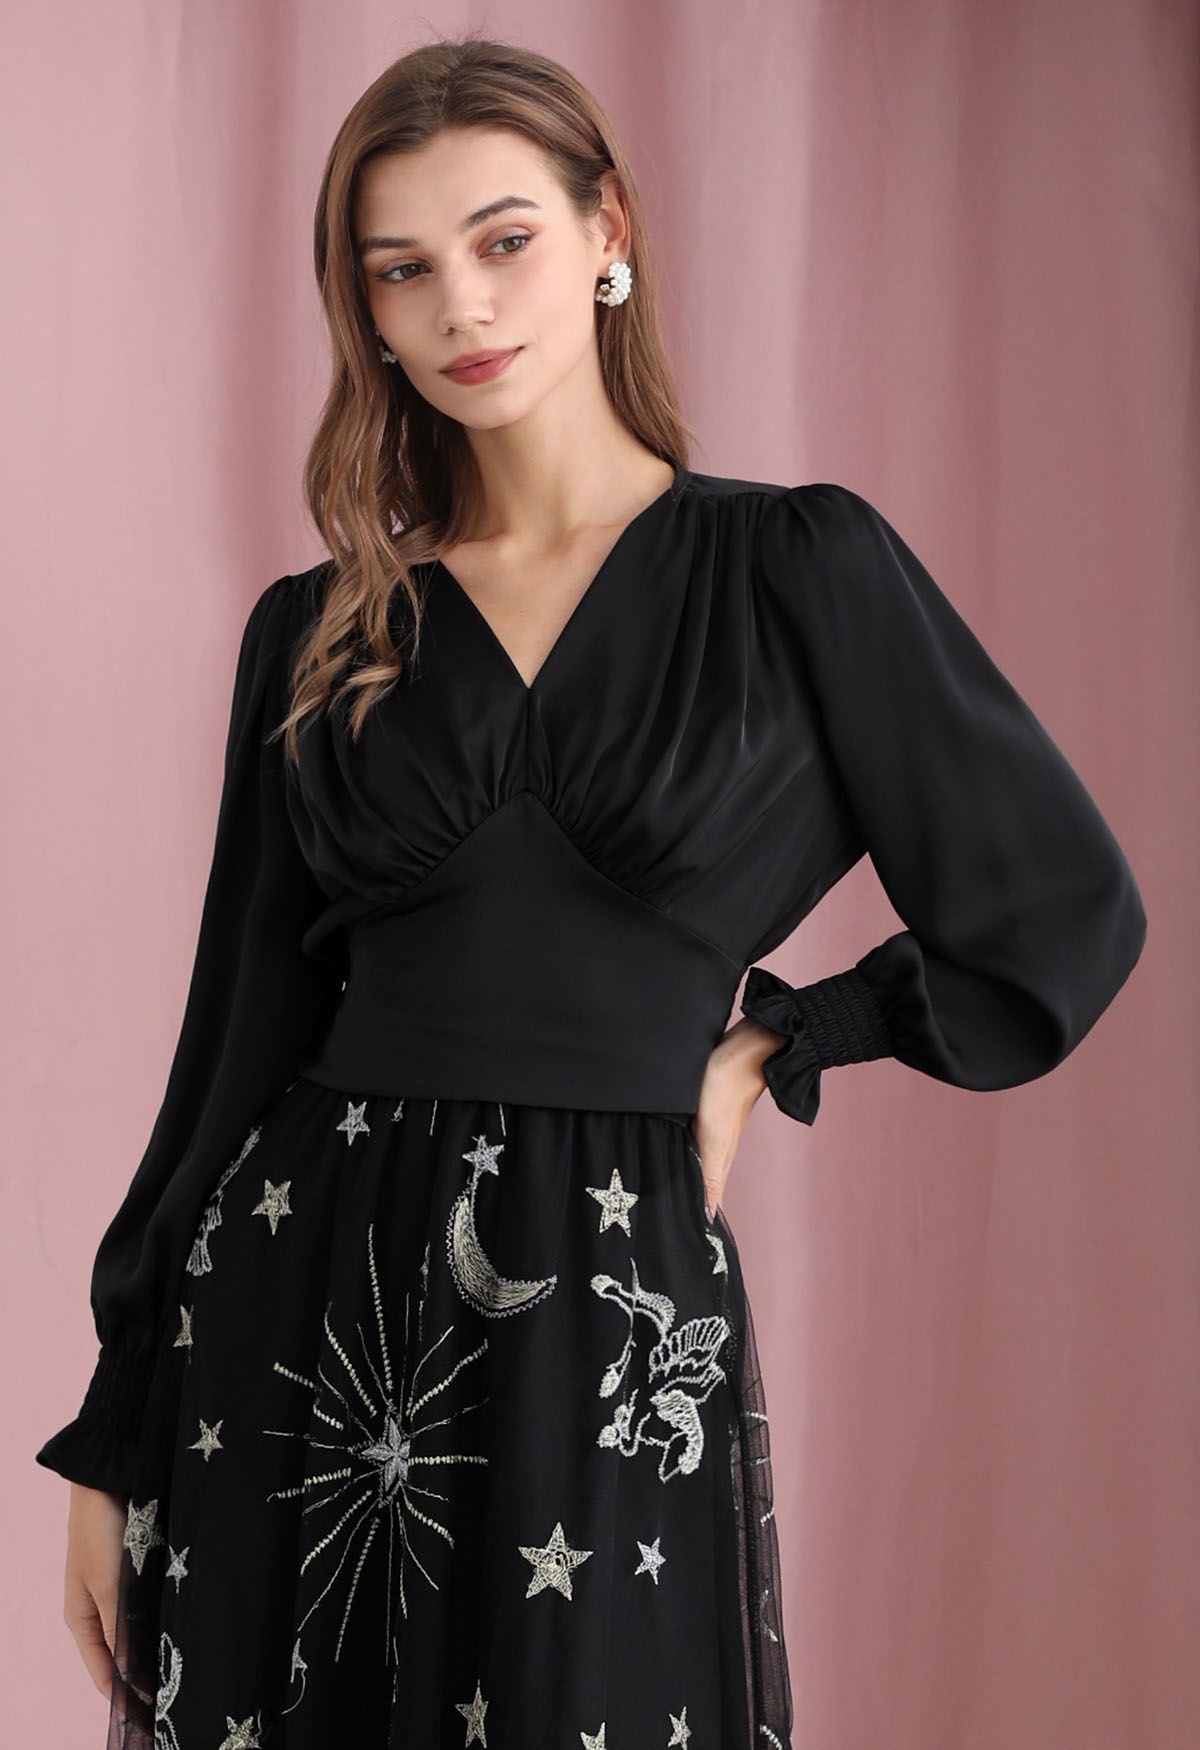 Satin Finish V-Neck Puff Sleeves Crop Top in Black